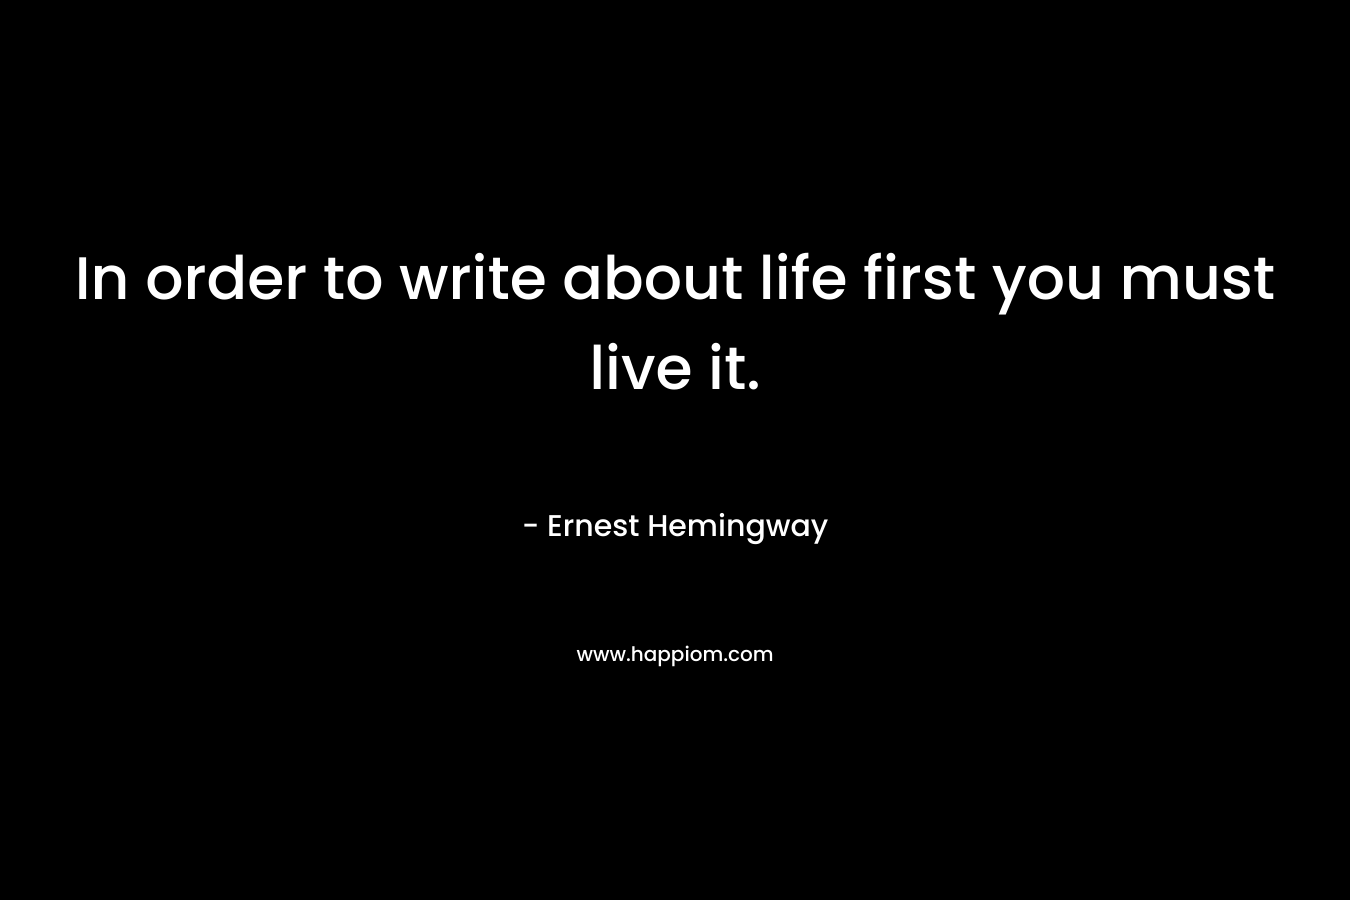 In order to write about life first you must live it. – Ernest Hemingway